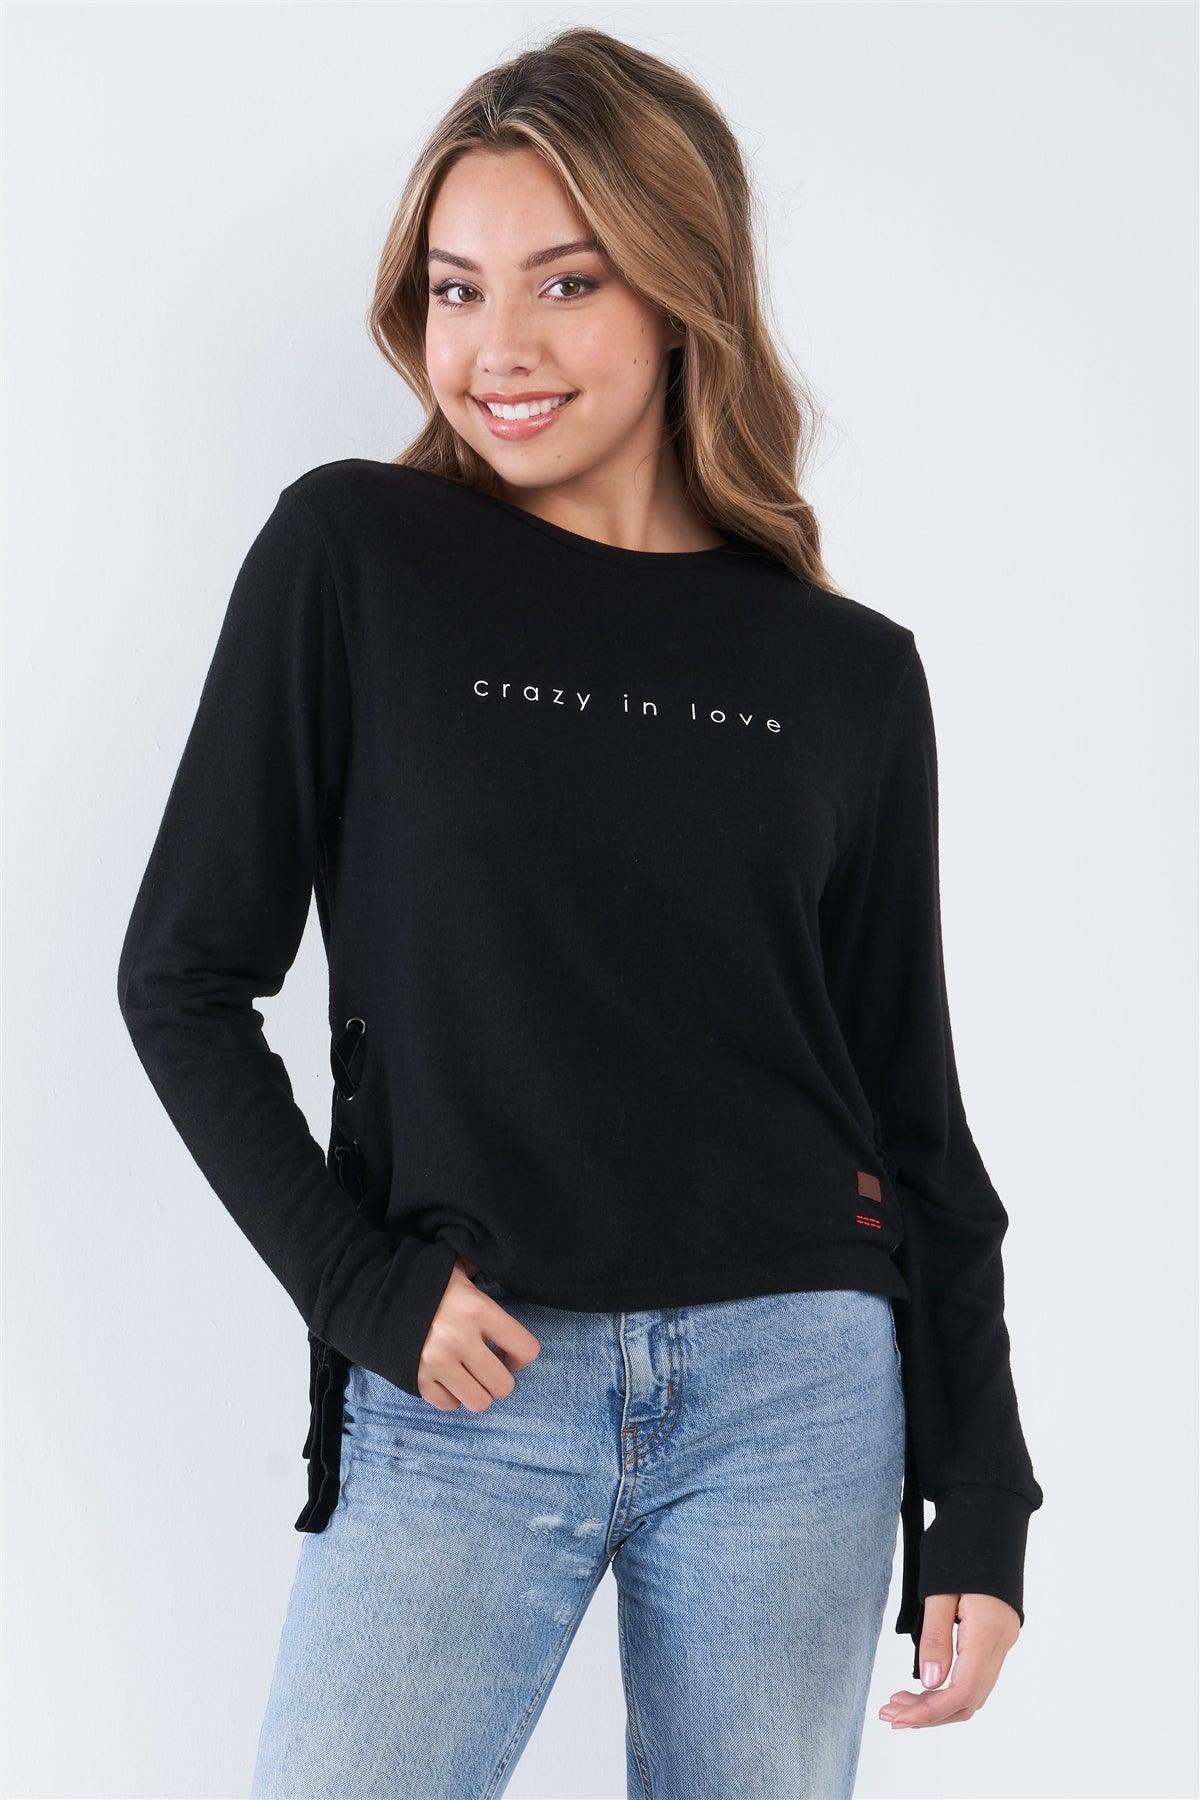 Black Long Sleeve "Crazy In Love" Graphic Crew Neck Side Lace Up Top